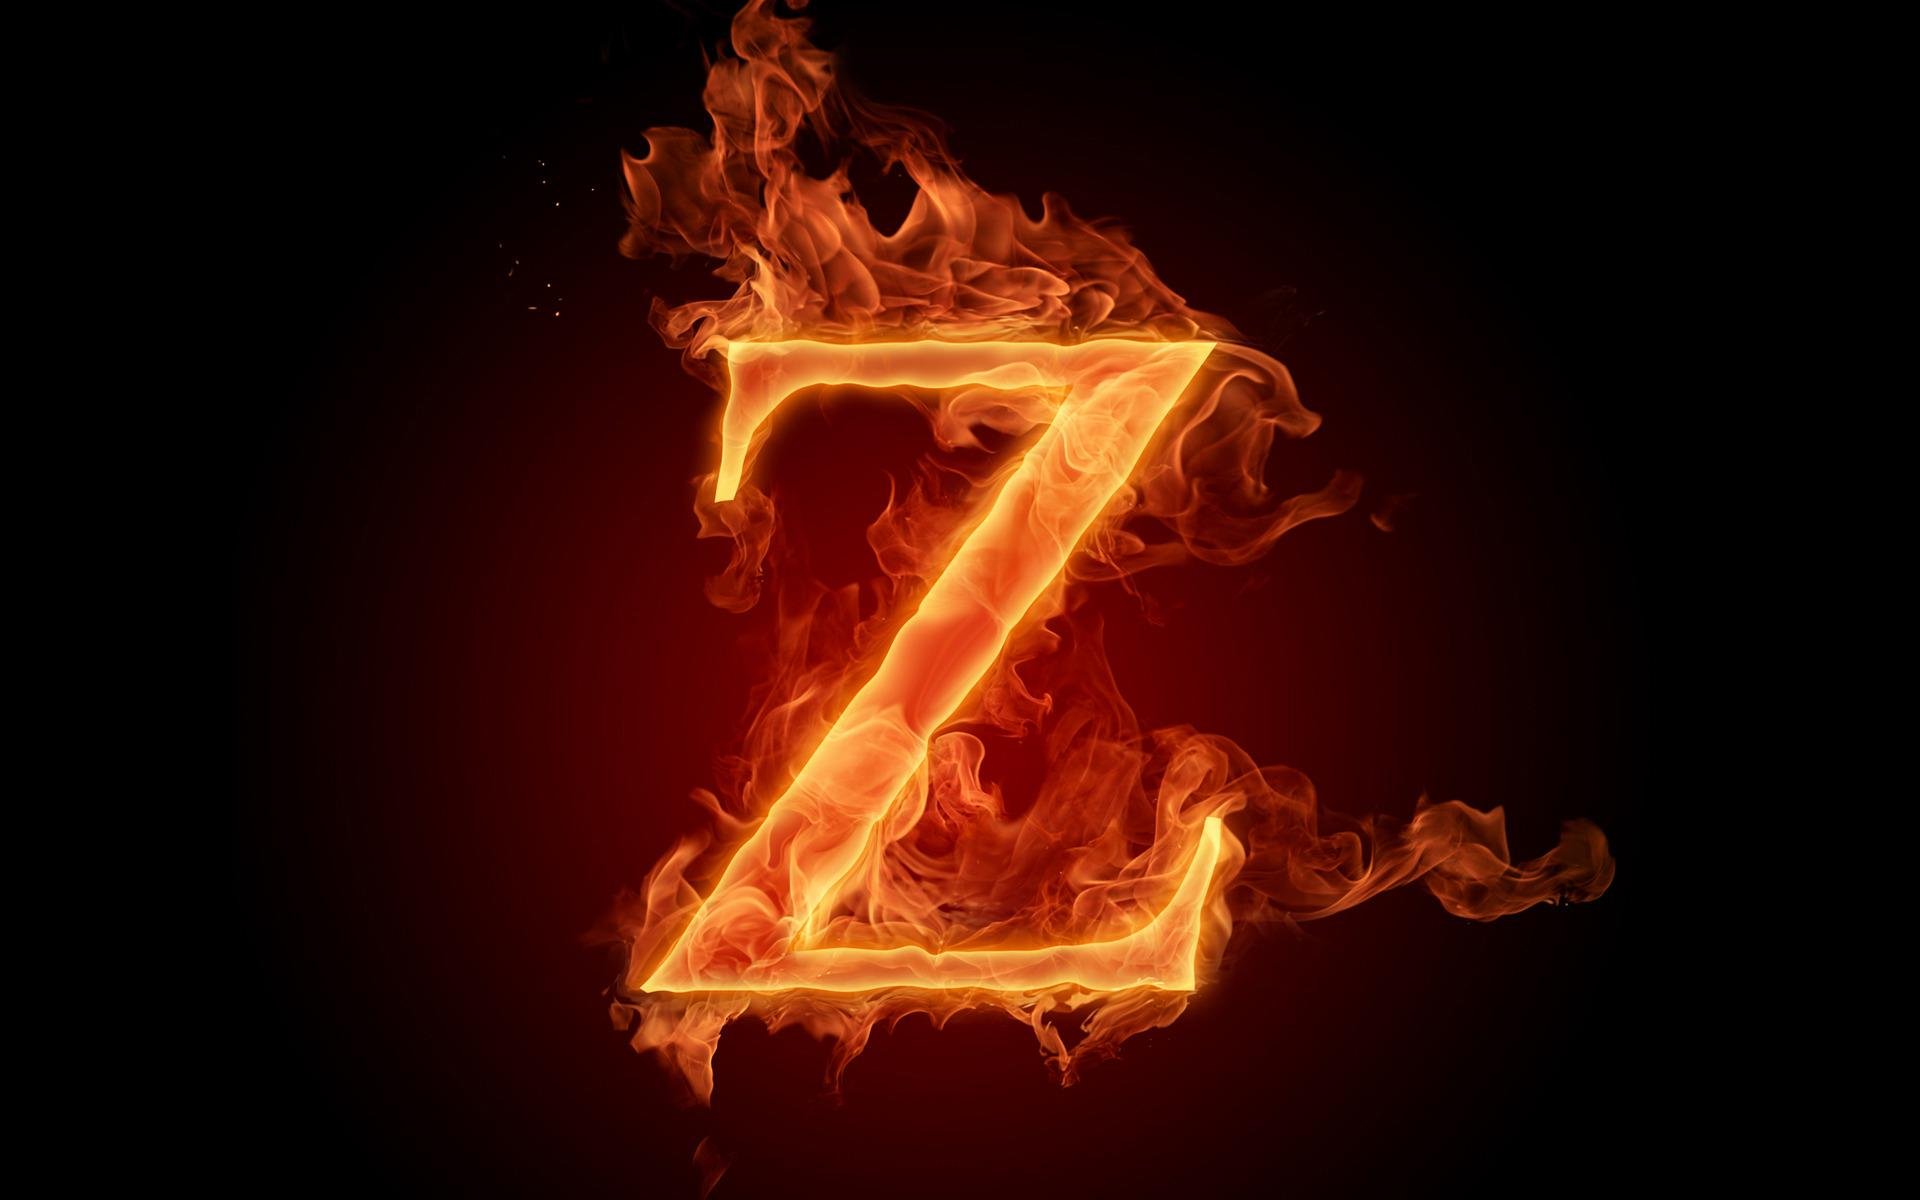 the fiery english alphabet picture z, 1920x1200 Wallpaper